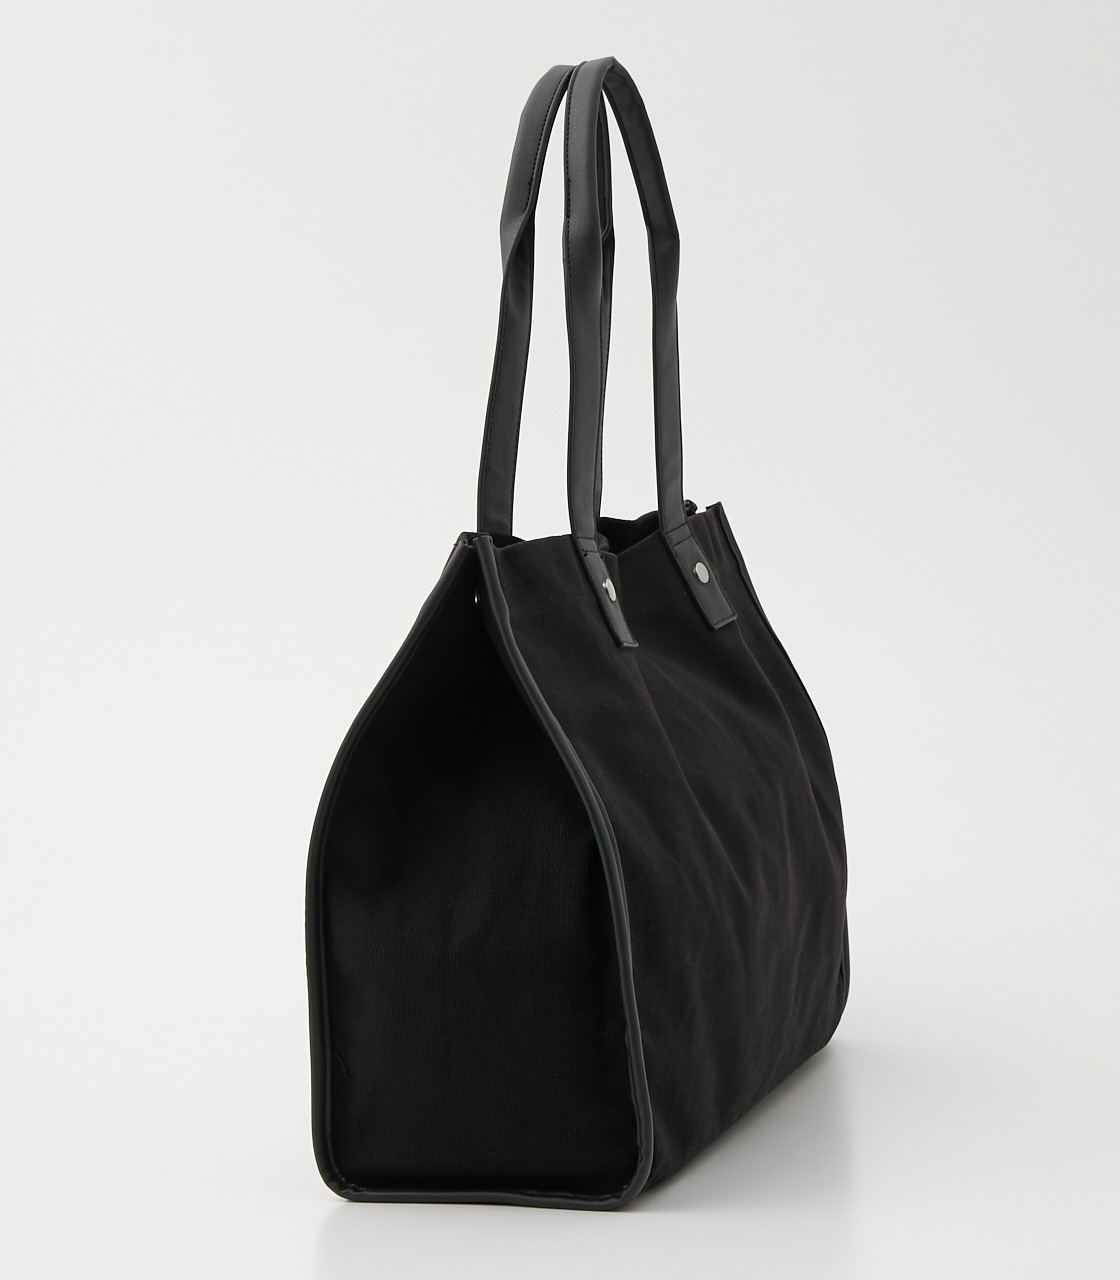 LINEN LIKE BIG TOTE BAG/リネンライクビッグトートバッグ 詳細画像 BLK 3